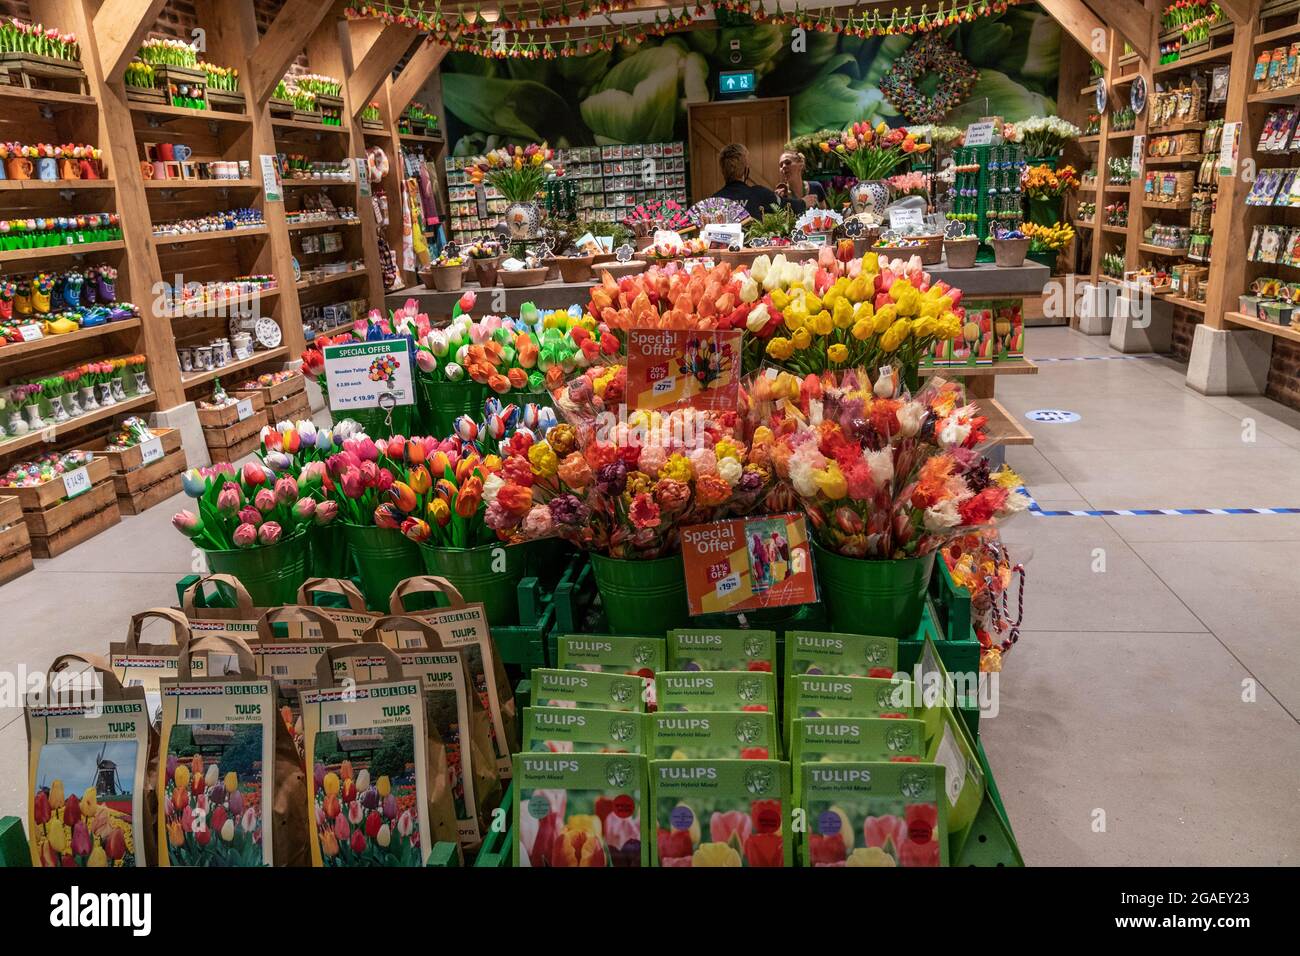 Amsterdam, New York, The Netherlands. 29th July, 2021. Amsterdam, the Netherlands - July 29, 2021: House of Tulips shop seen at Shiphol airport. Fully vaccinated travelers are allowed to travel during pandemic but required to wear masks at airports and while on aircrafts. (Credit Image: © Lev Radin/ZUMA Press Wire) Stock Photo